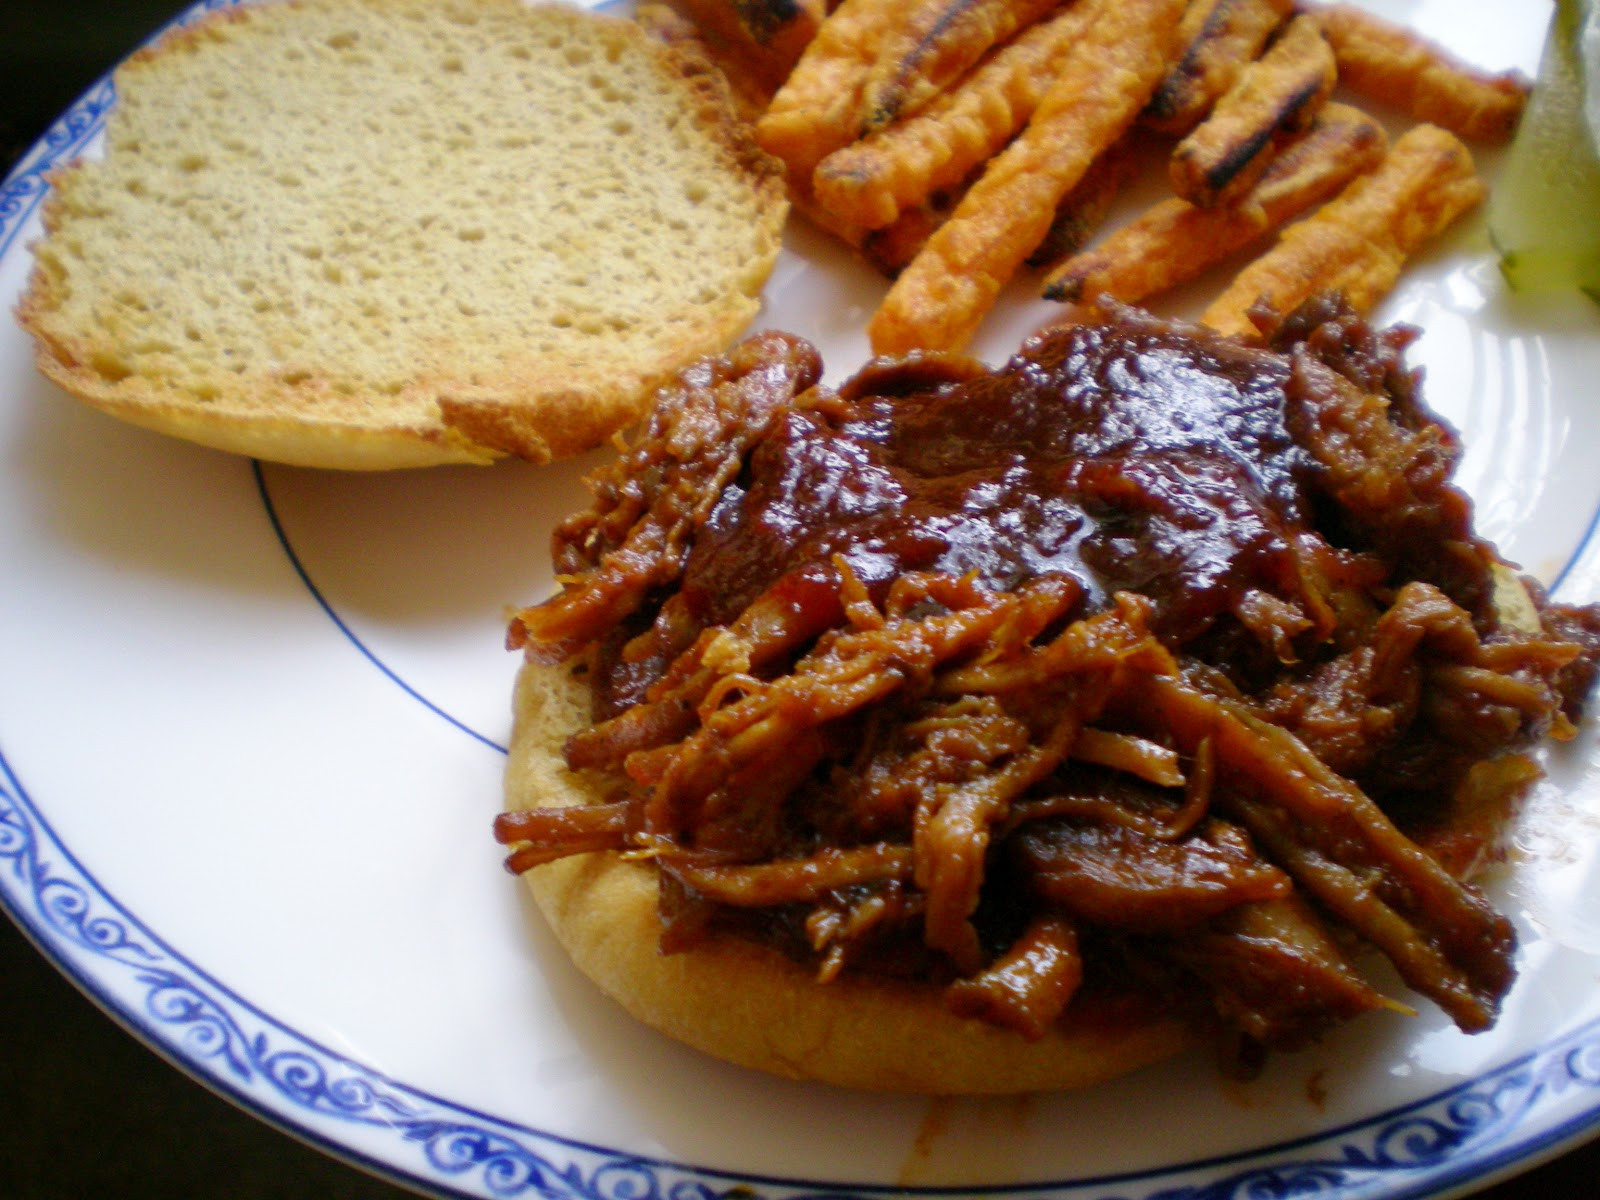 Homemade Bbq Sauce For Pulled Pork
 Slow Cooker BBQ Pulled Pork with Homemade Barbeque Sauce